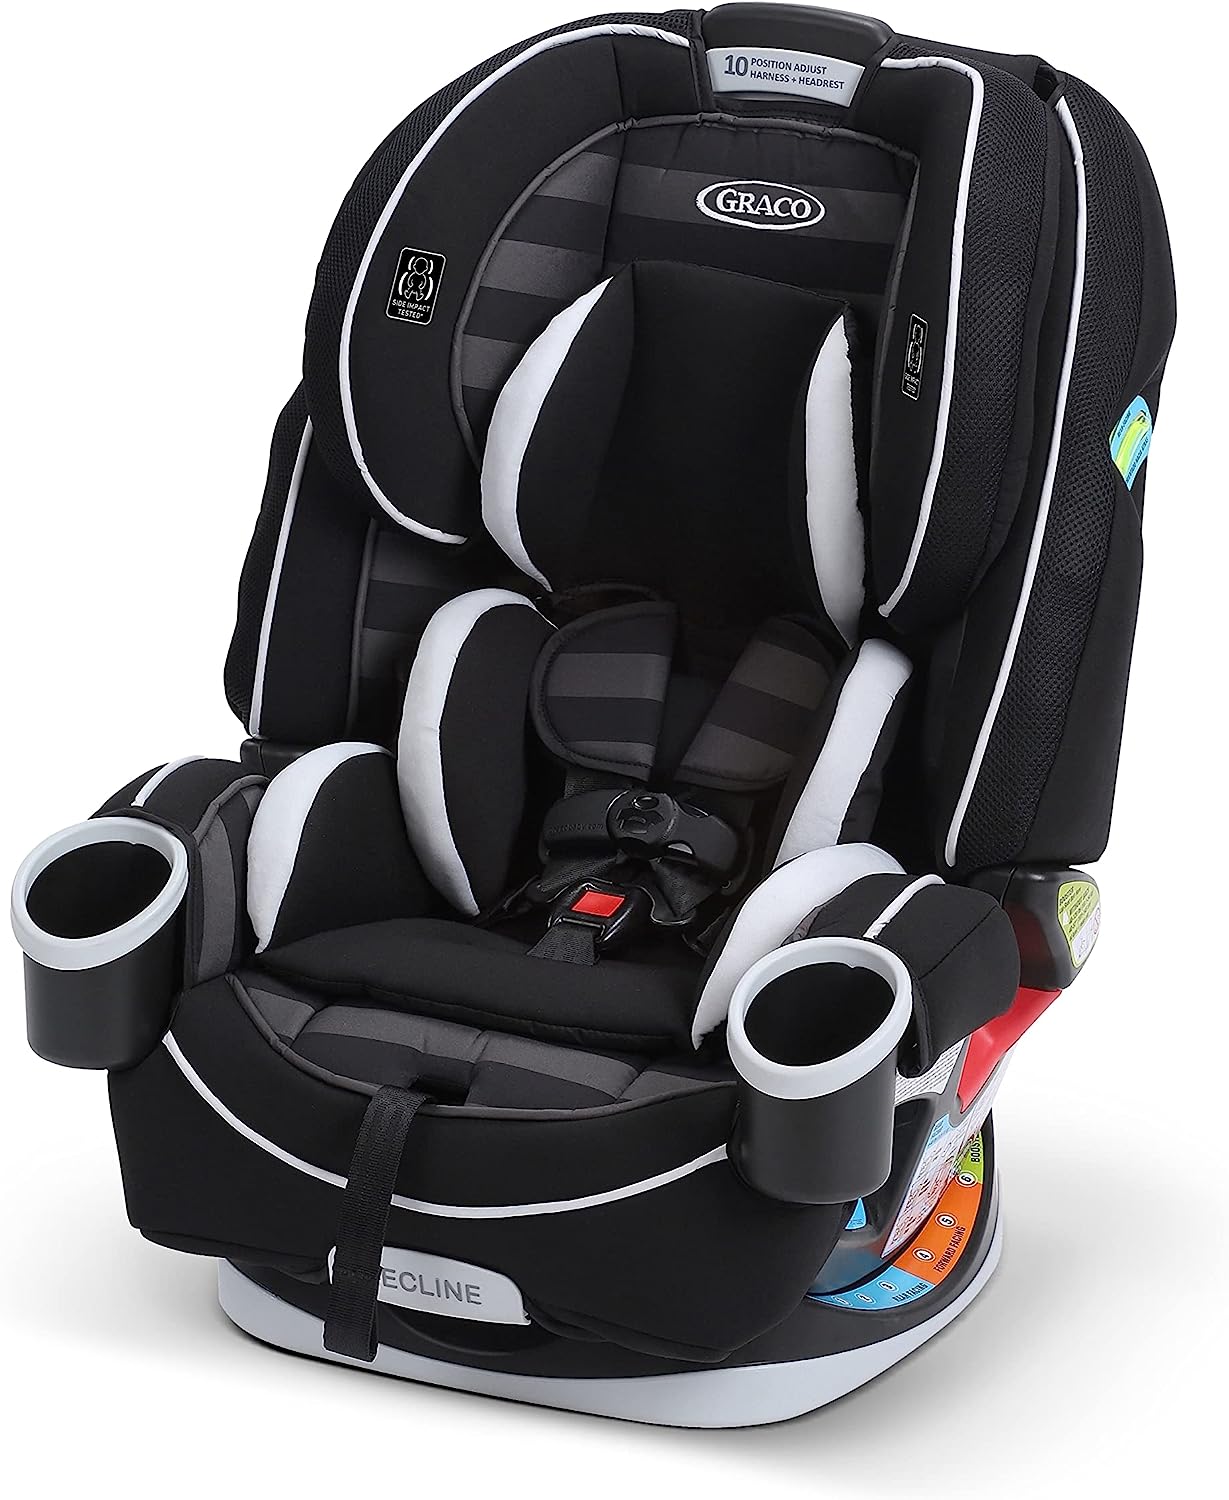 Graco All In One Car Seat, 4Ever 4-in-1 Car Seat, Convertible from Infant to Toddler (1.8-18 kg), Washable Seat Cover, Rockweave